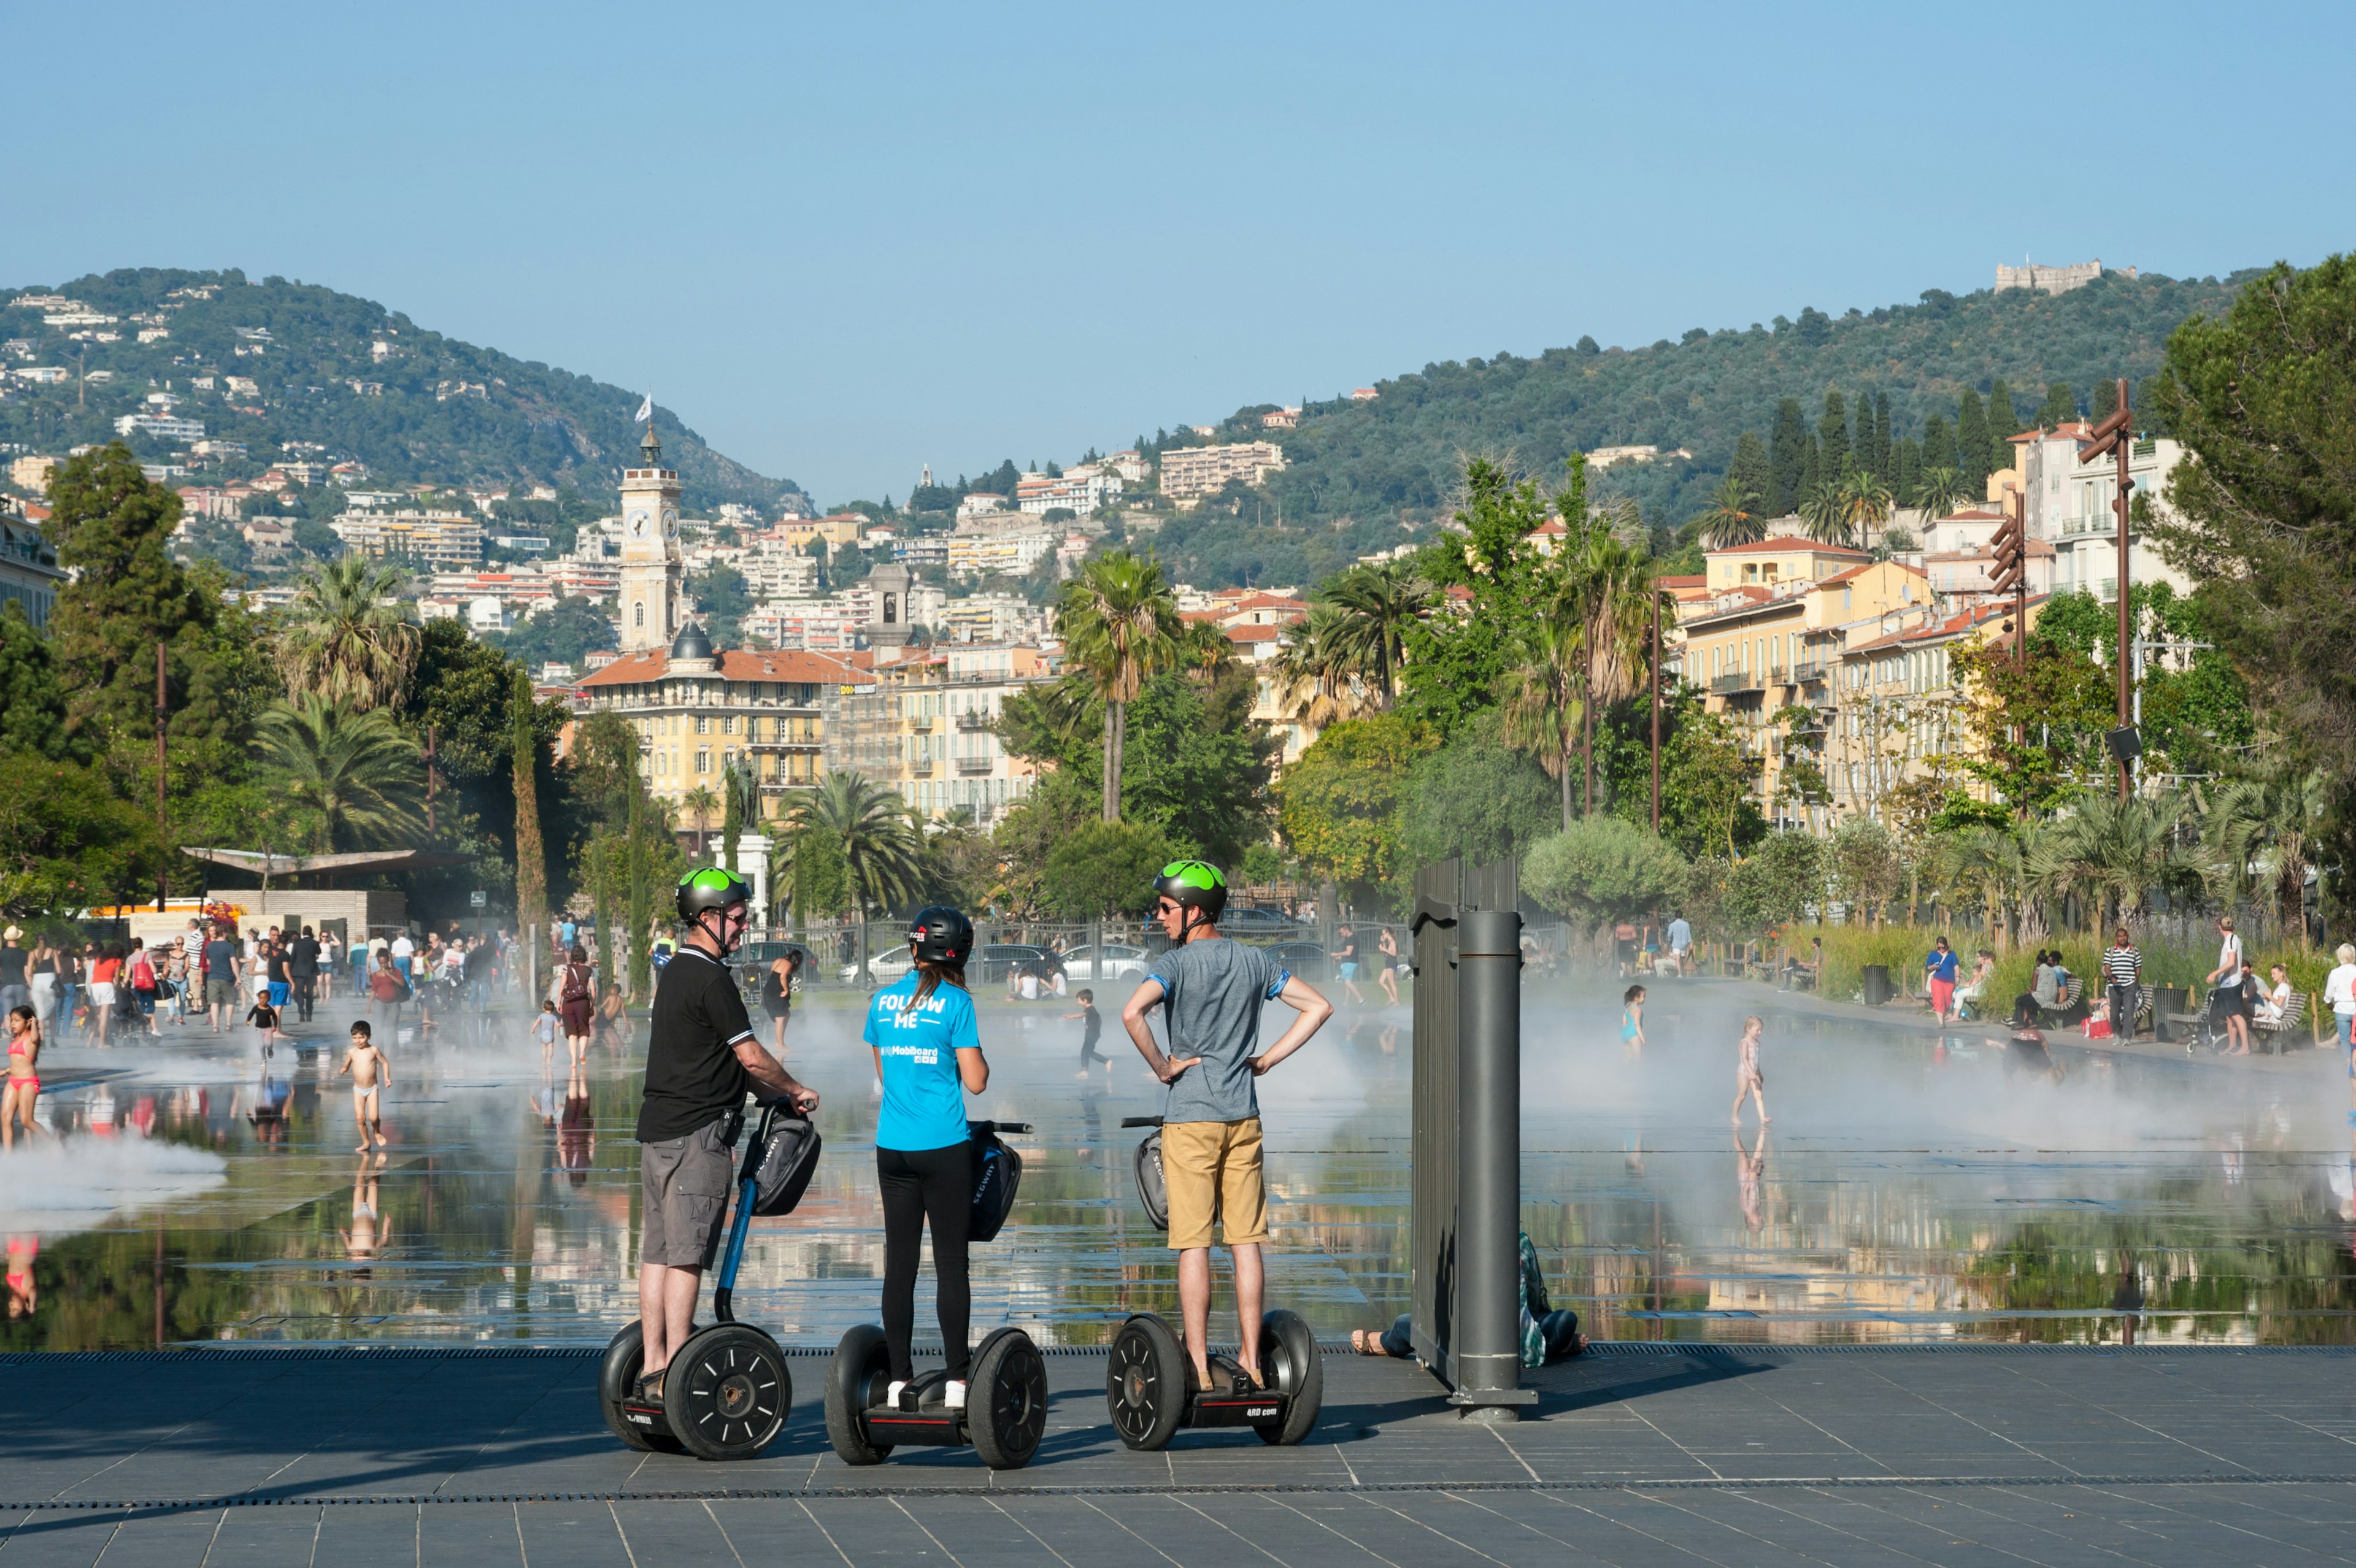 18th May, 2015: Tourists on segways at the Promenade du Paillon in Nice.